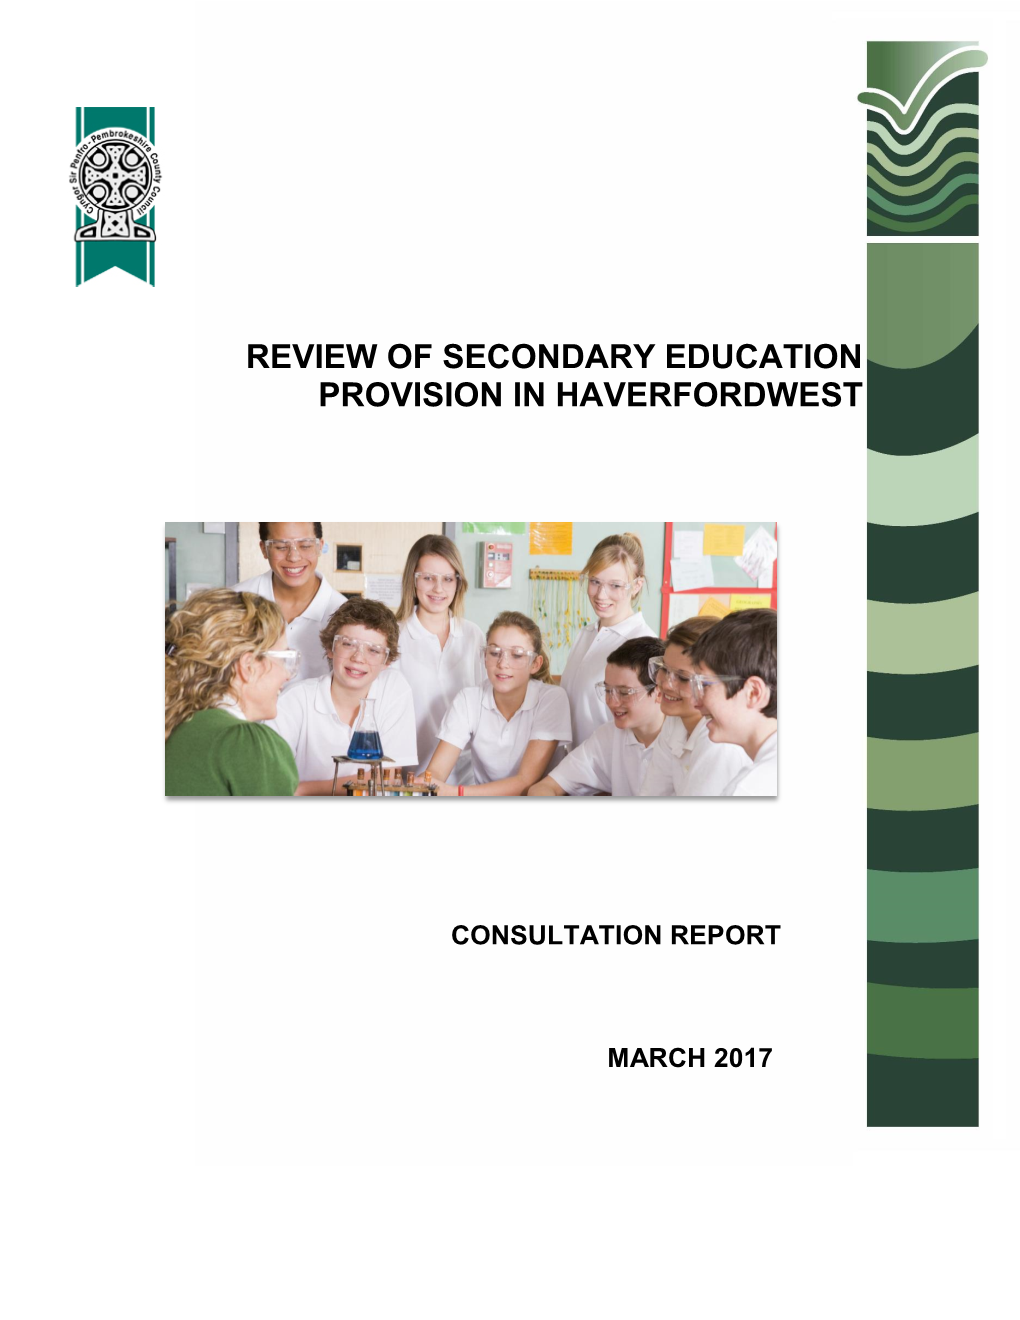 Review of Secondary Education Provision in Haverfordwest